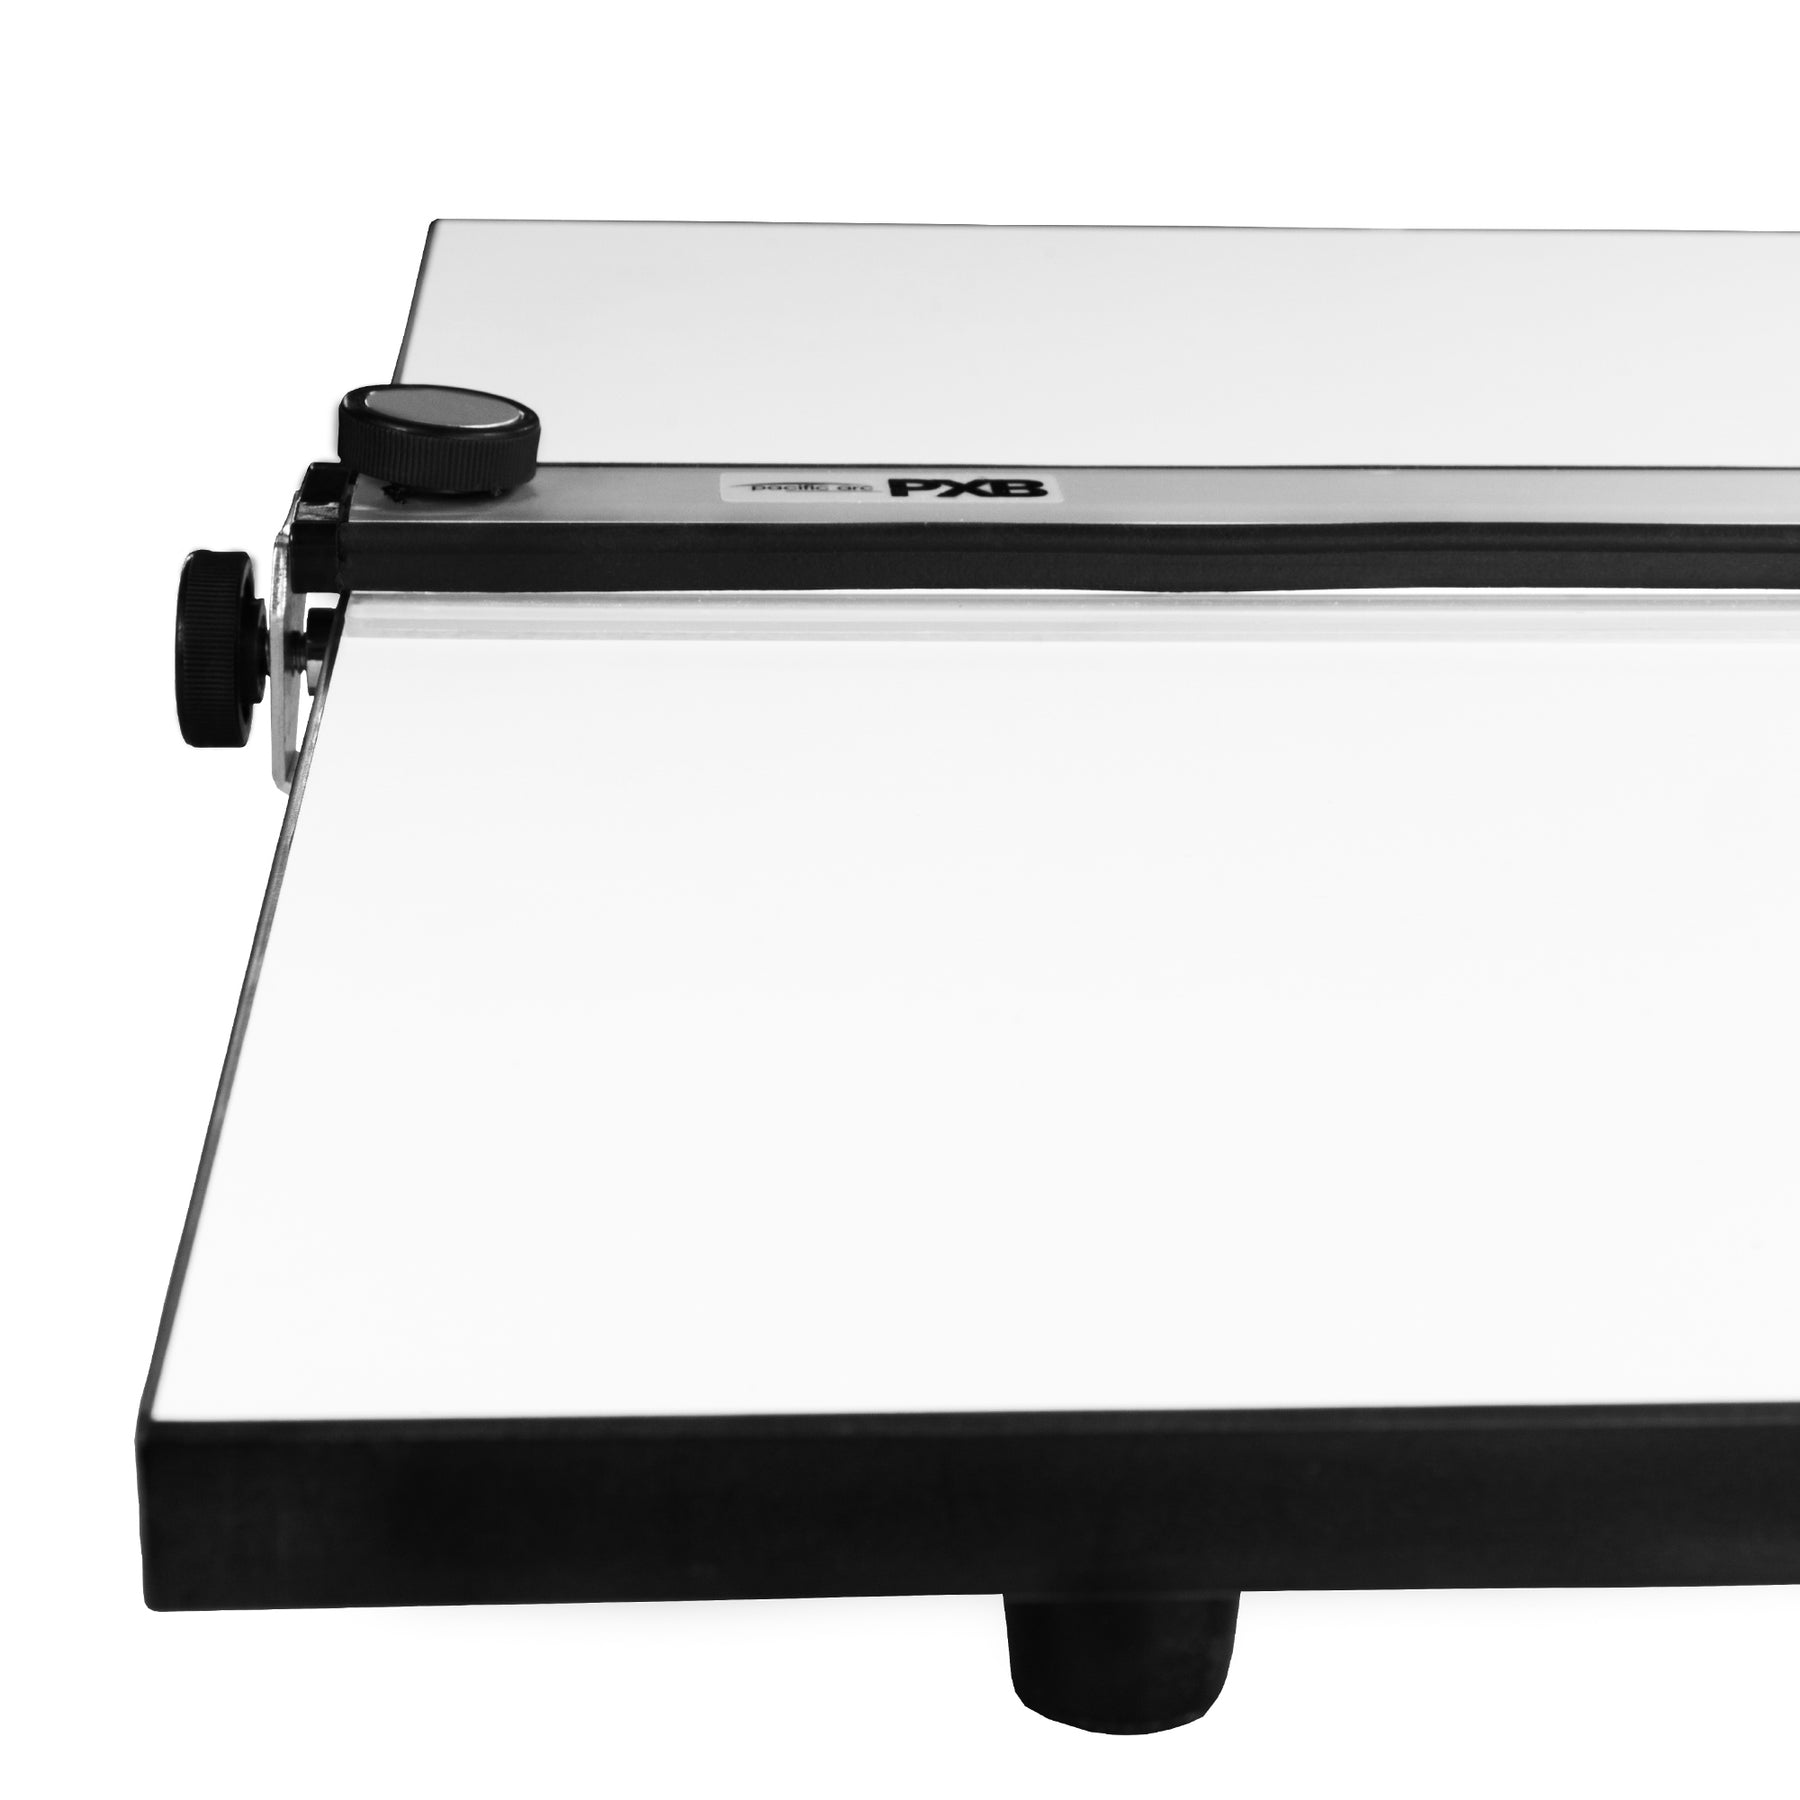 Acurit Pxb Drawing Boards For Artists And Designers - Portable Workspace  For Drawing, Sketching, Drafting, Painting - Fixed Angled Laminated Surface  : Target